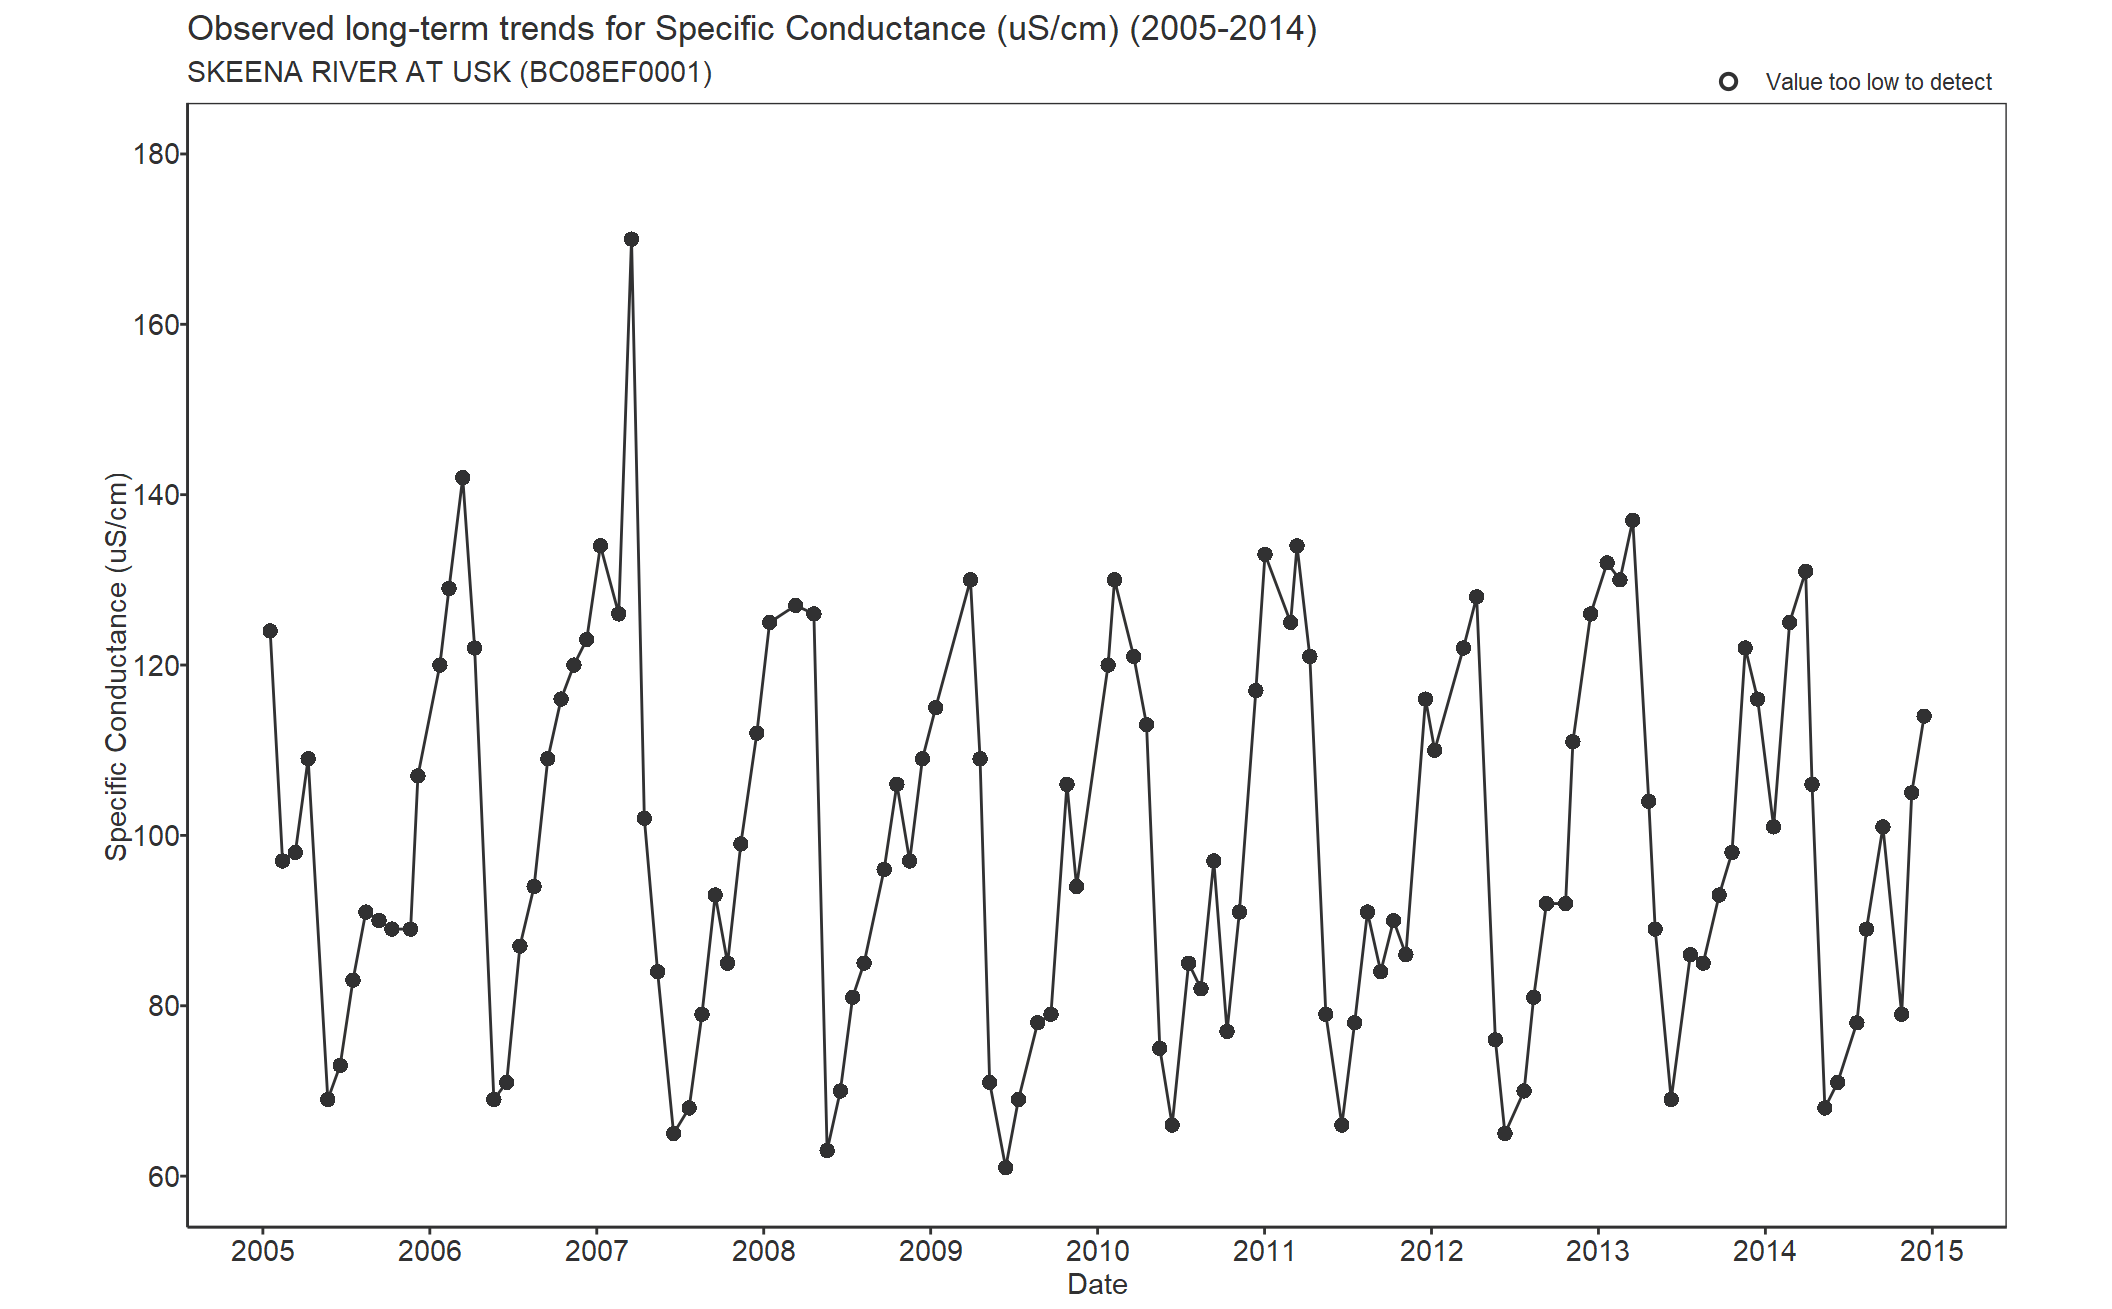 Observed long-term trends for Specific Conductance (2005-2014)